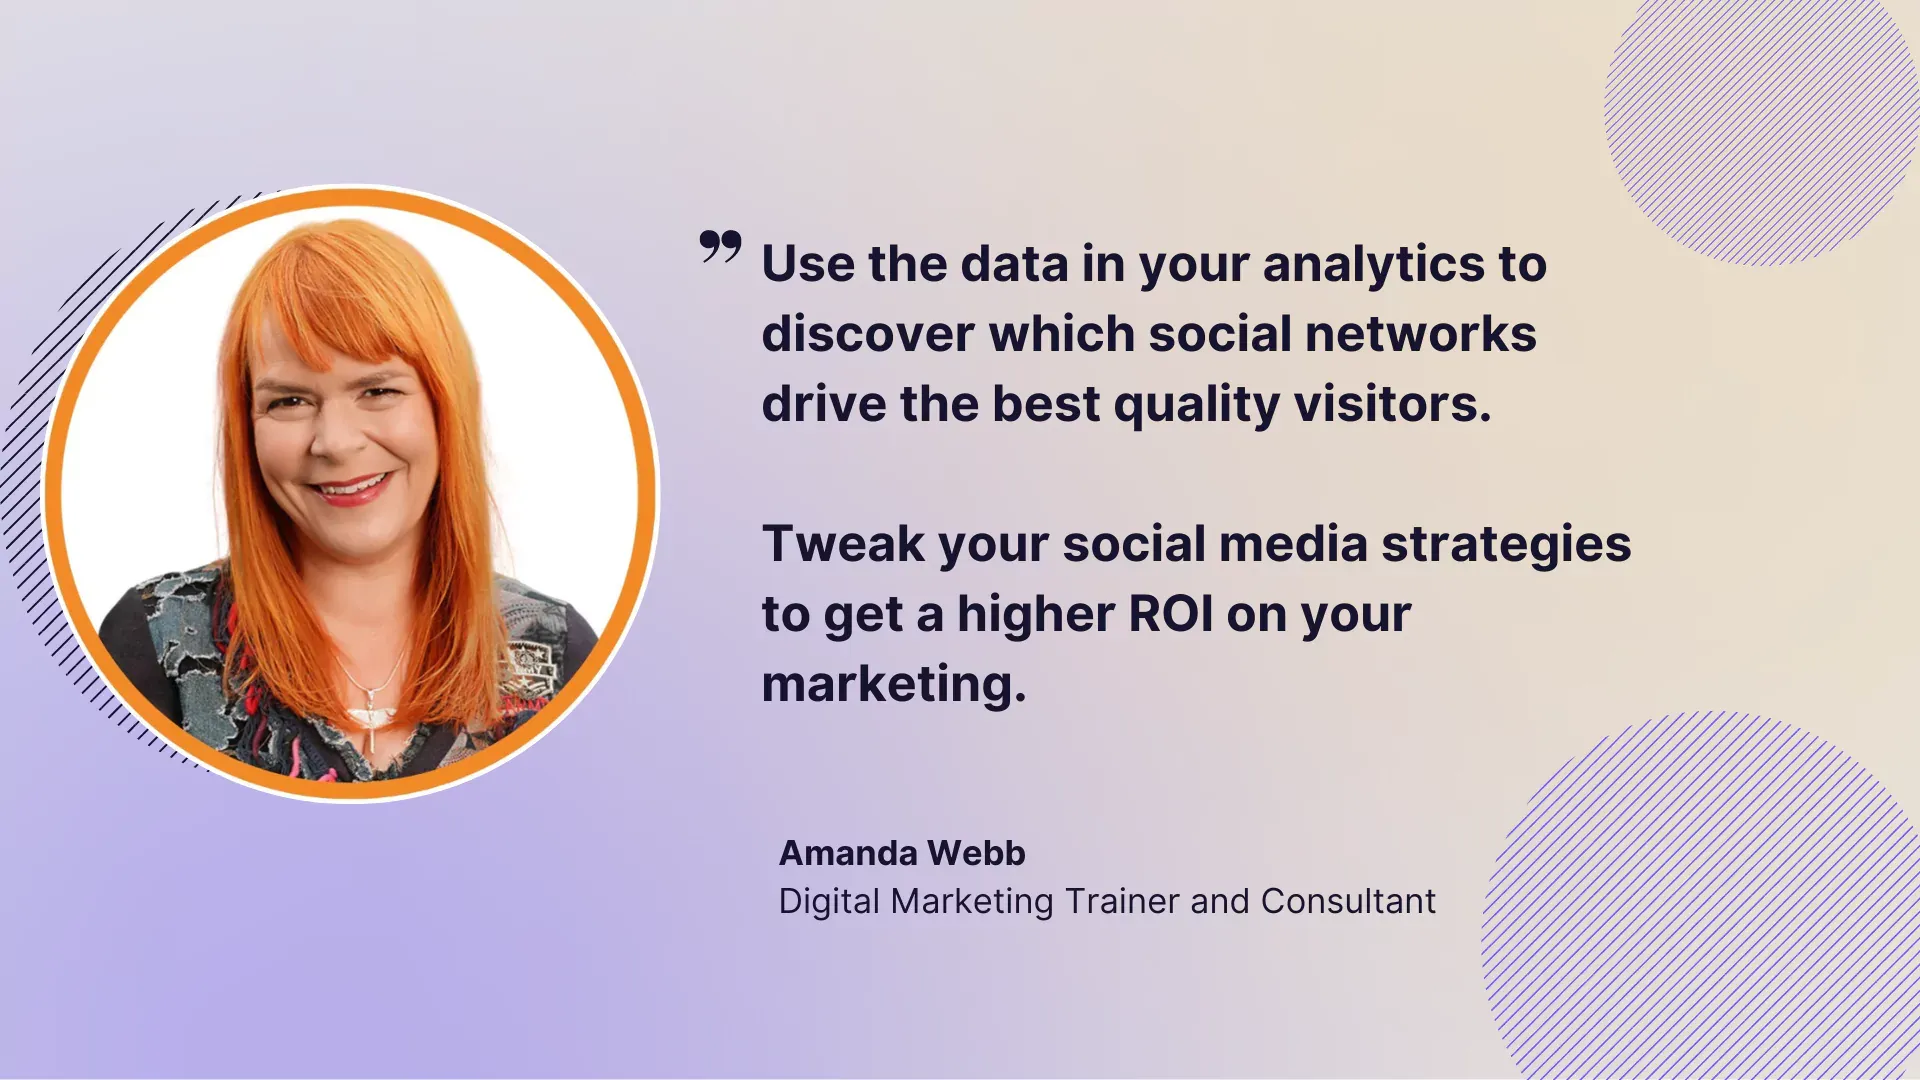 use analytics as one of the best social media practices